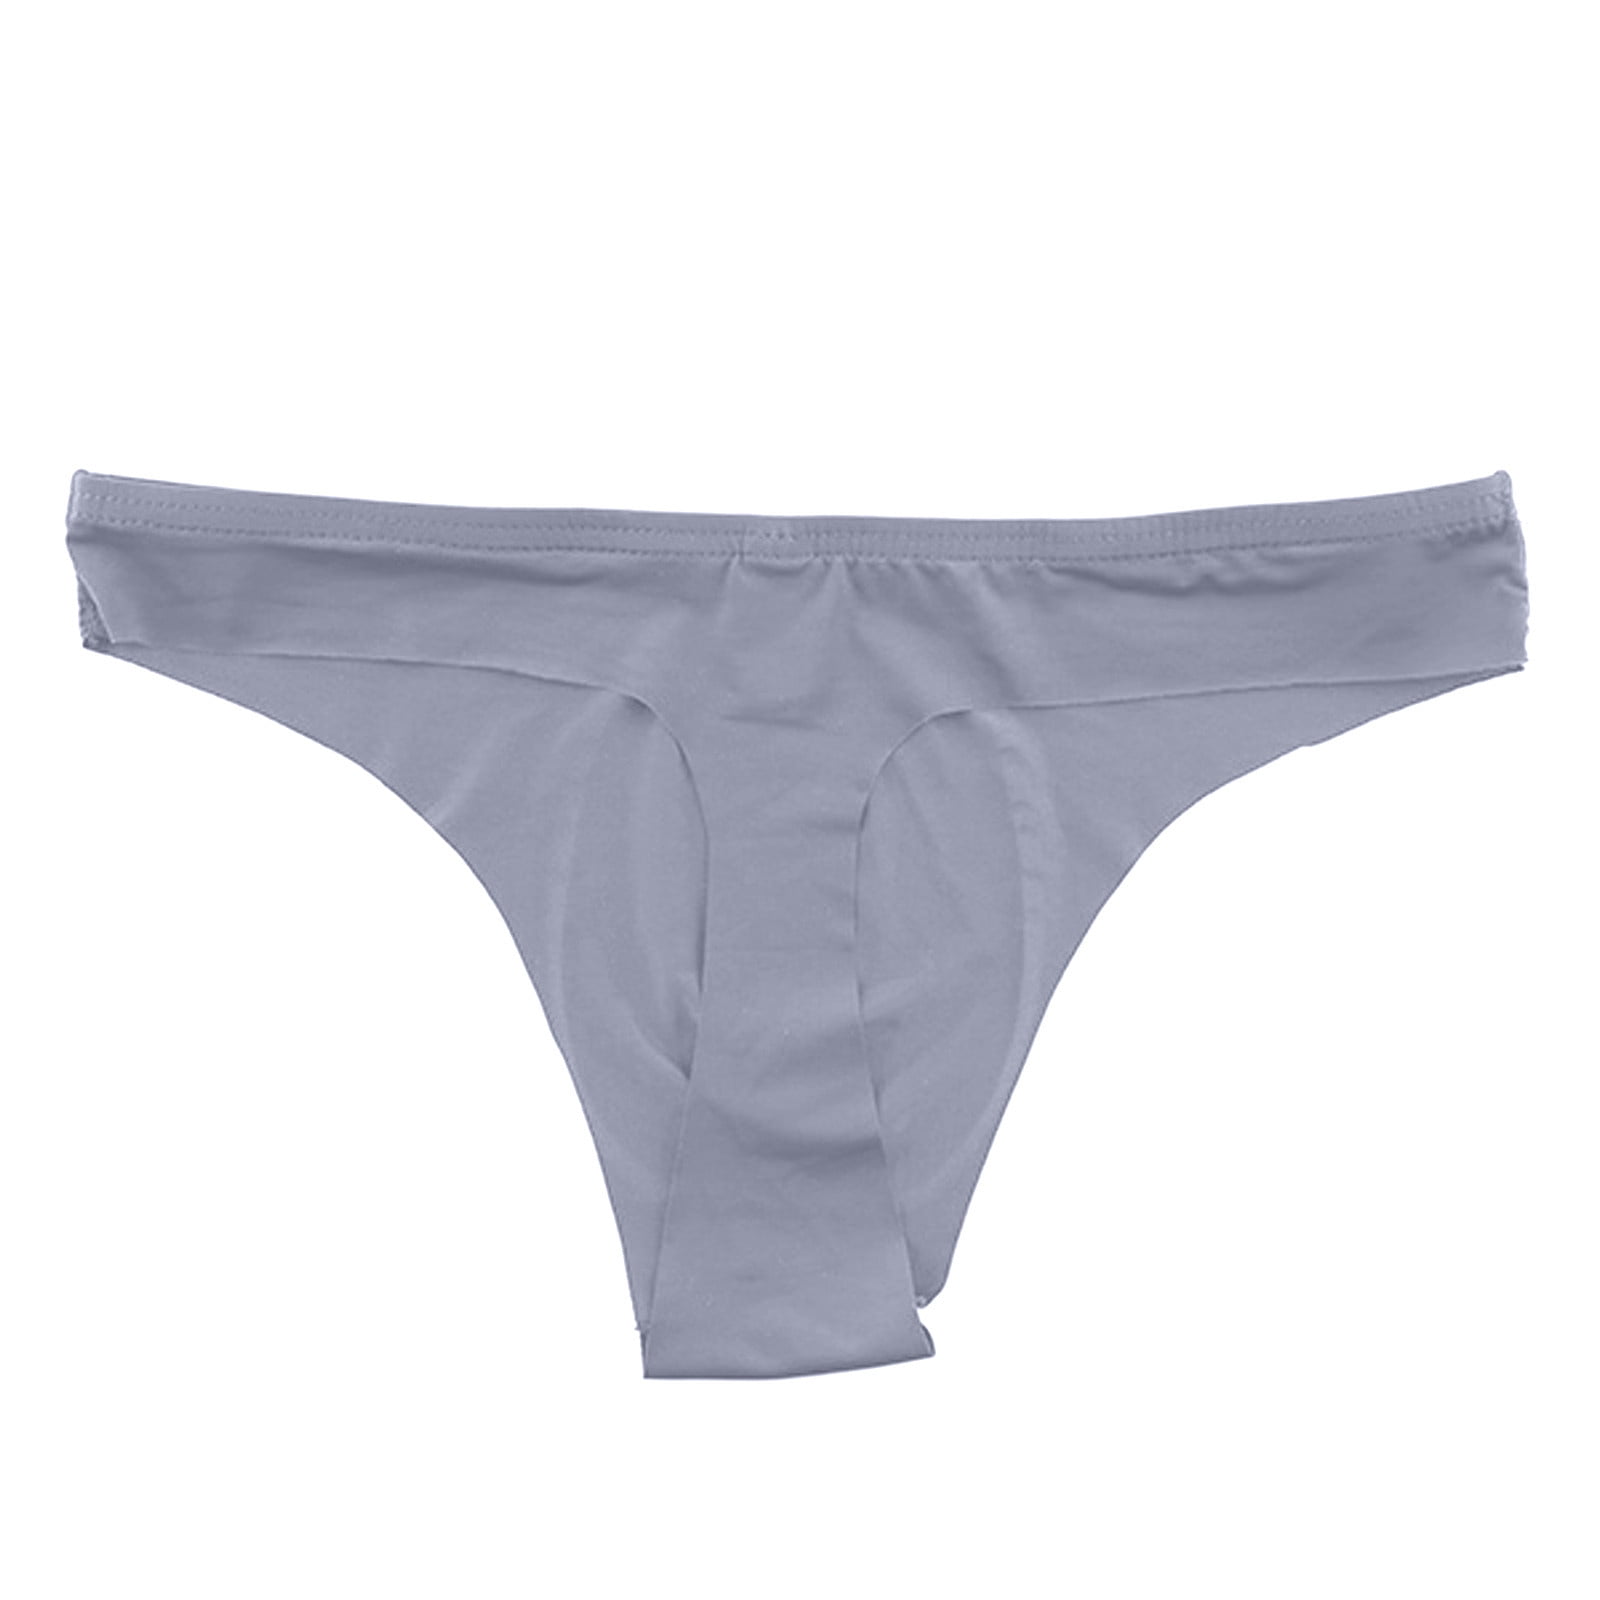  to-Go Panty Kit Includes 4 Items Seamless Thong